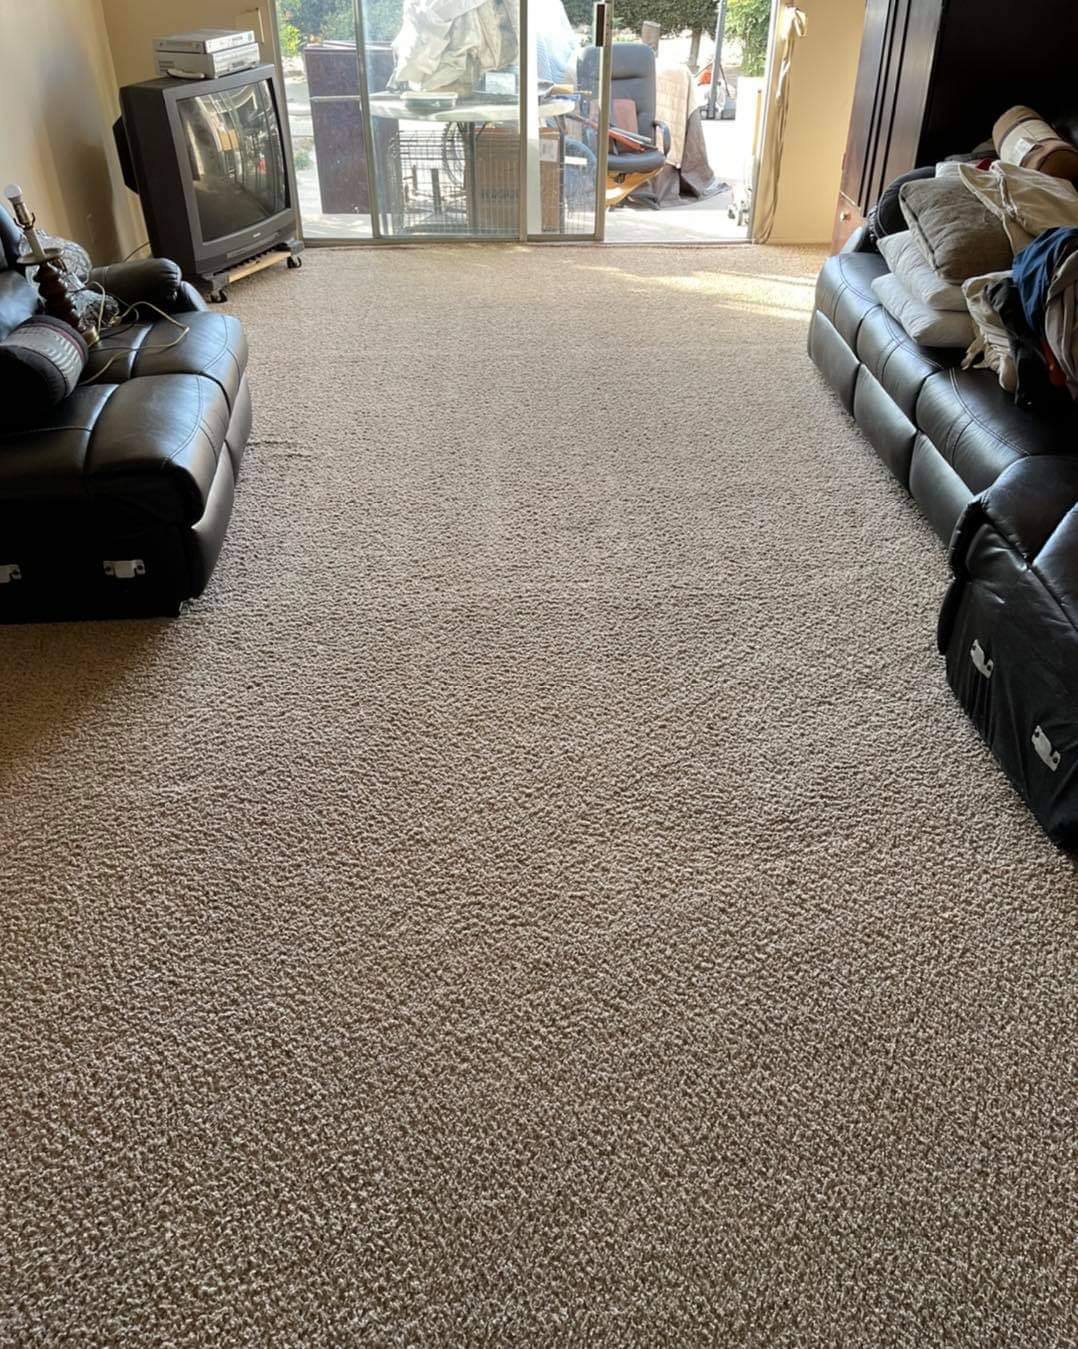 Carpet Cleaning Photo